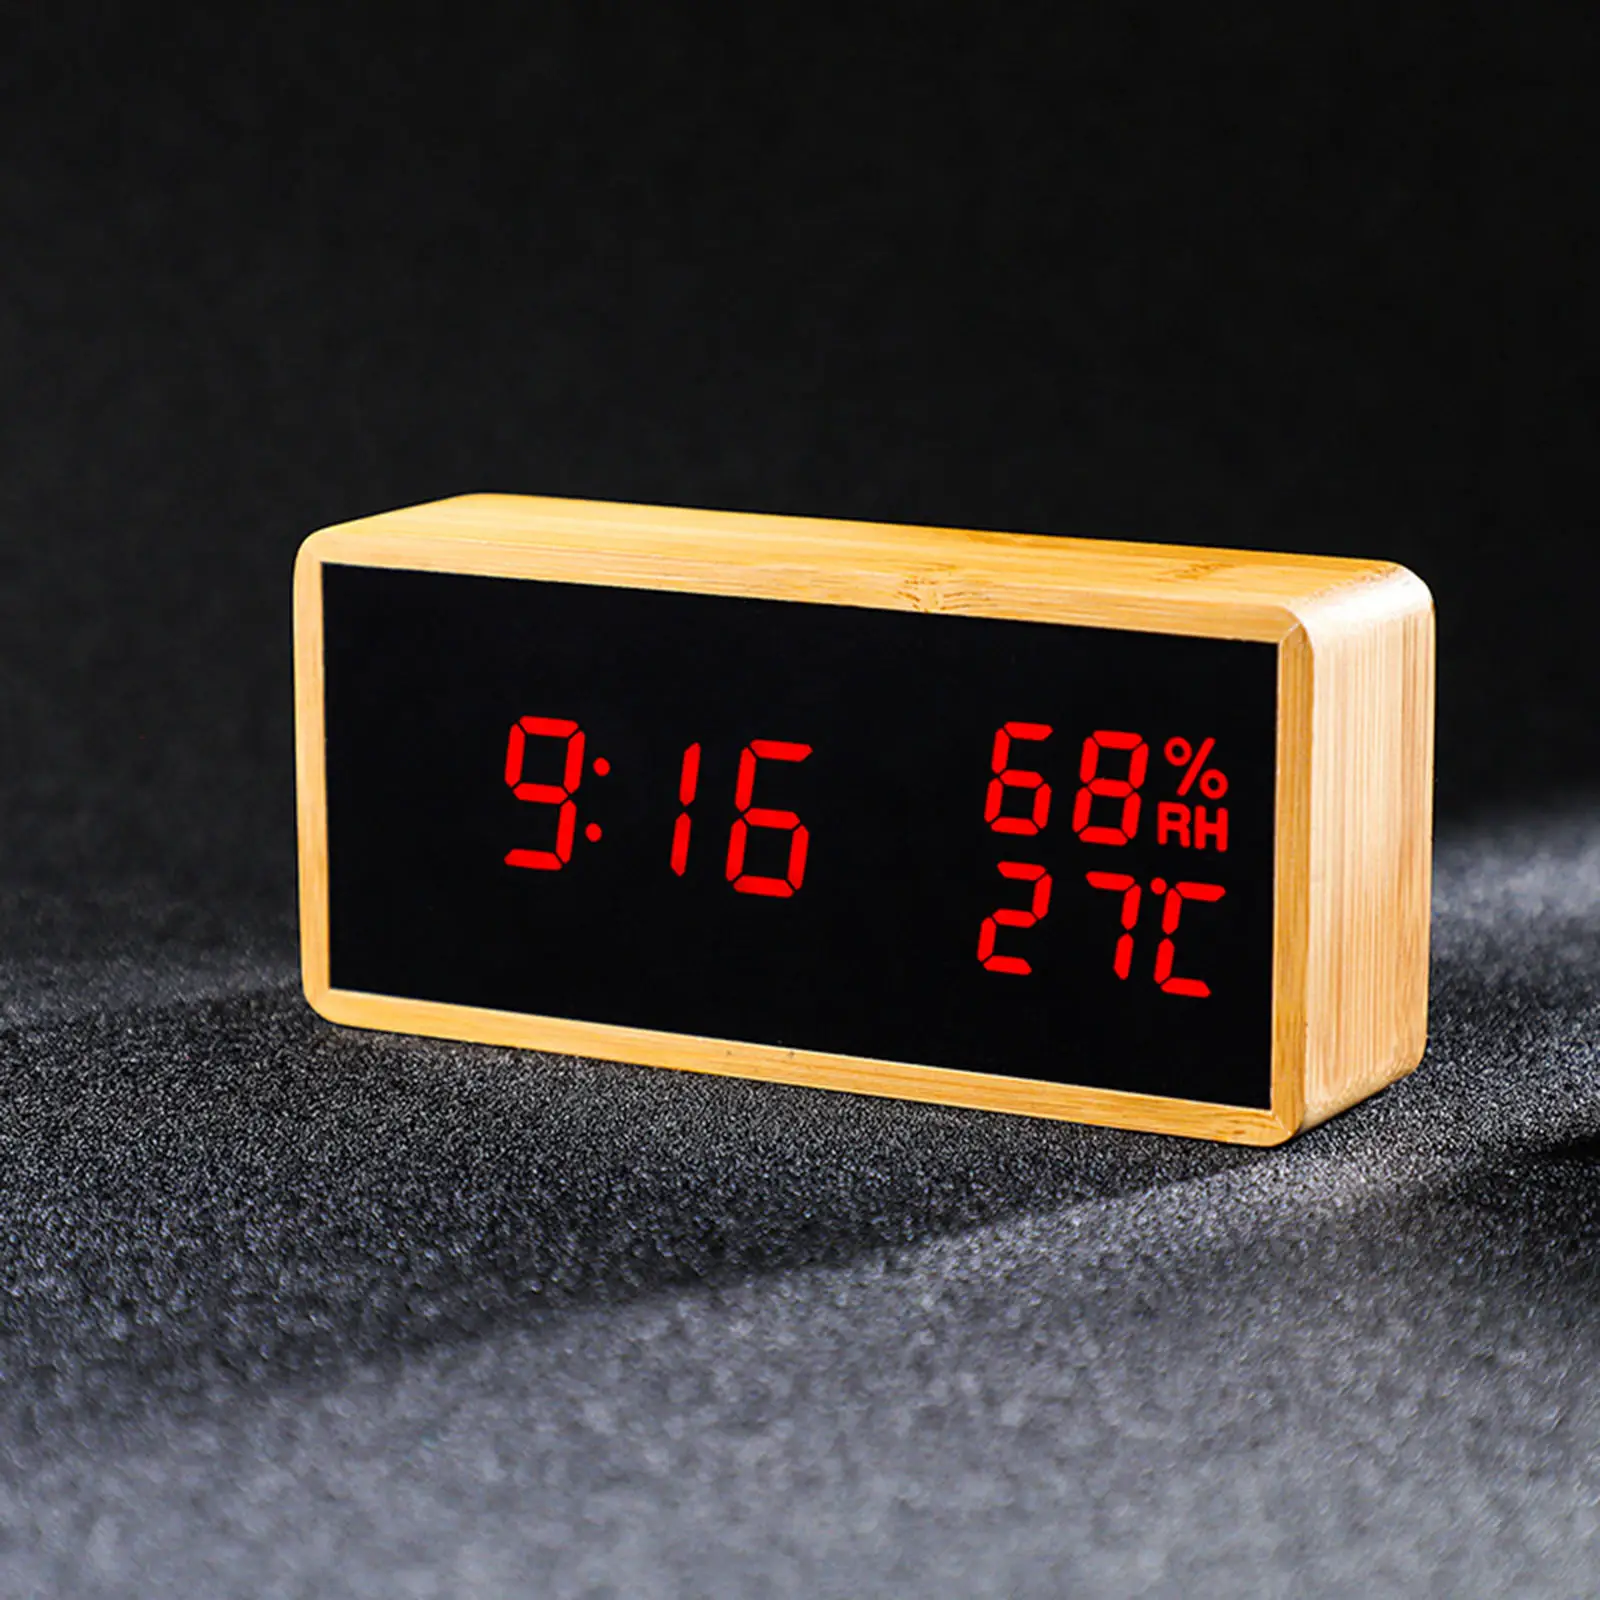 Modern Digital Alarm Clock with Snooze 12/24H Thermometer 5